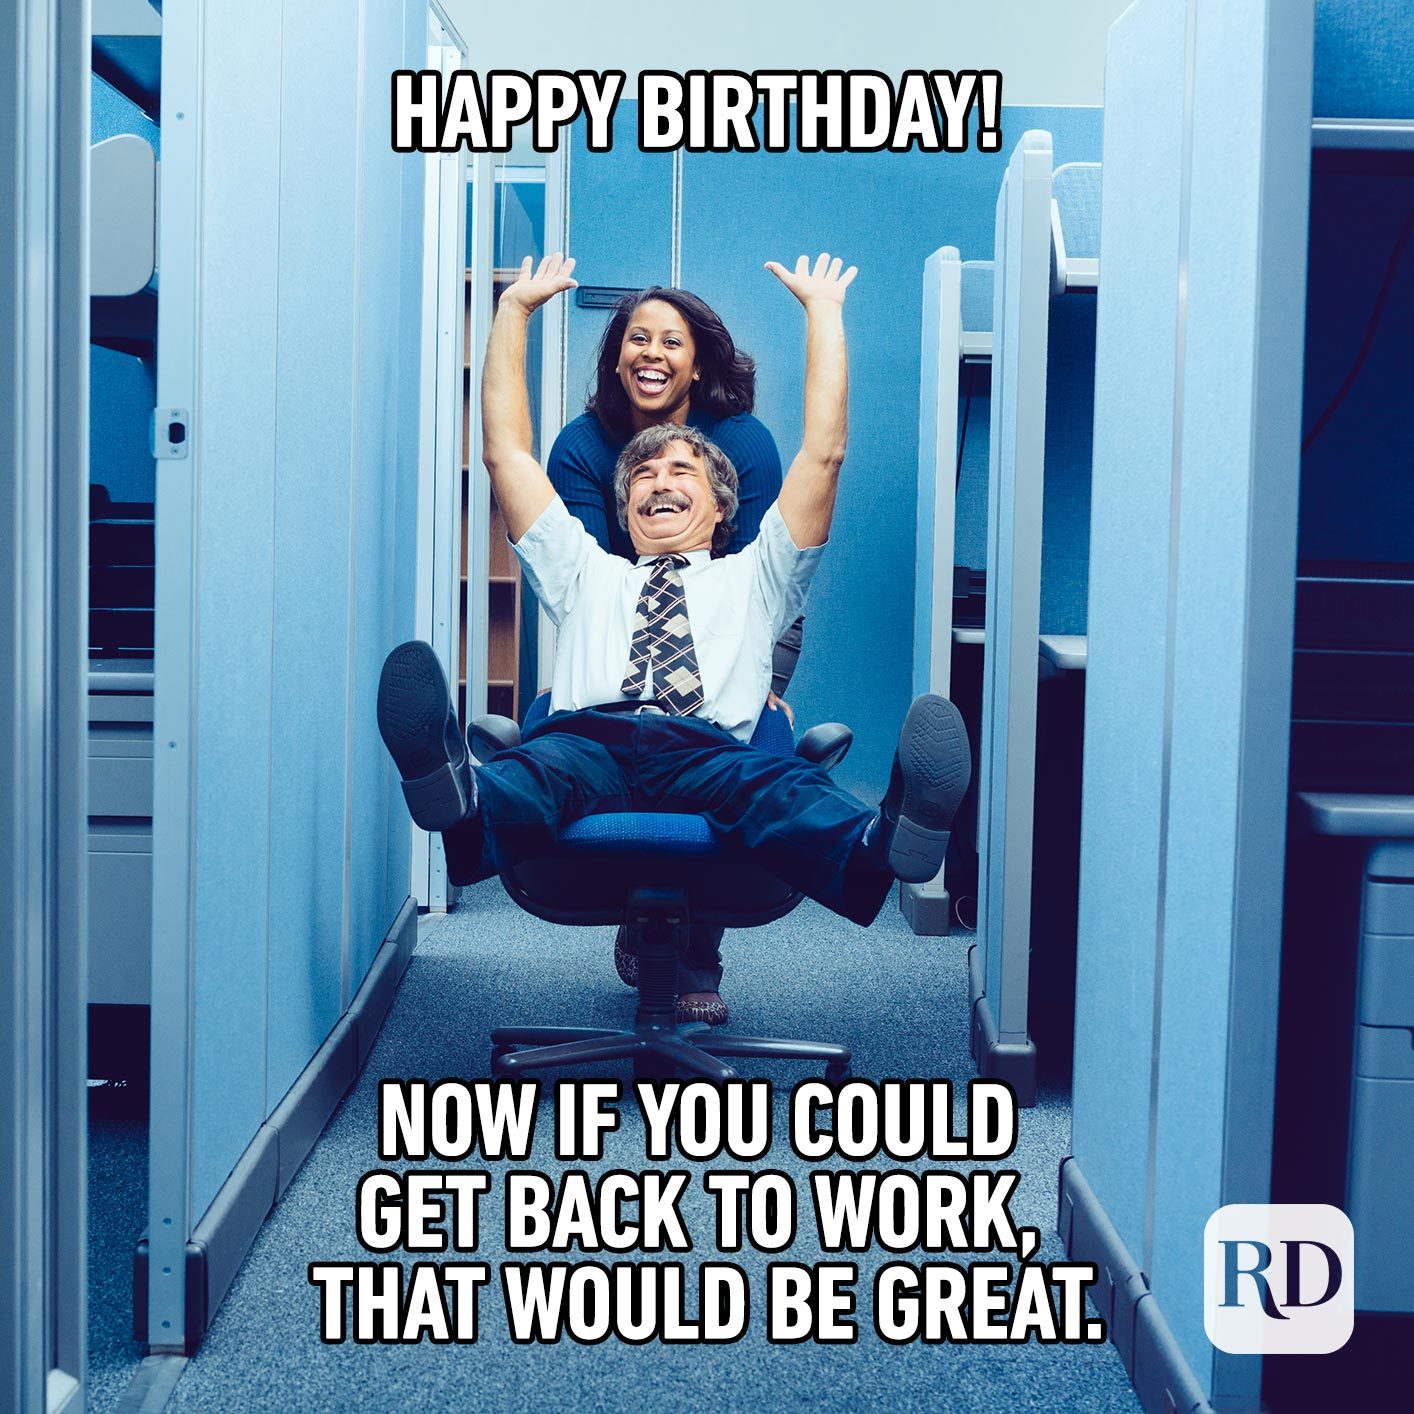 Happy Birthday! Now if you could get back to work, that would be great.